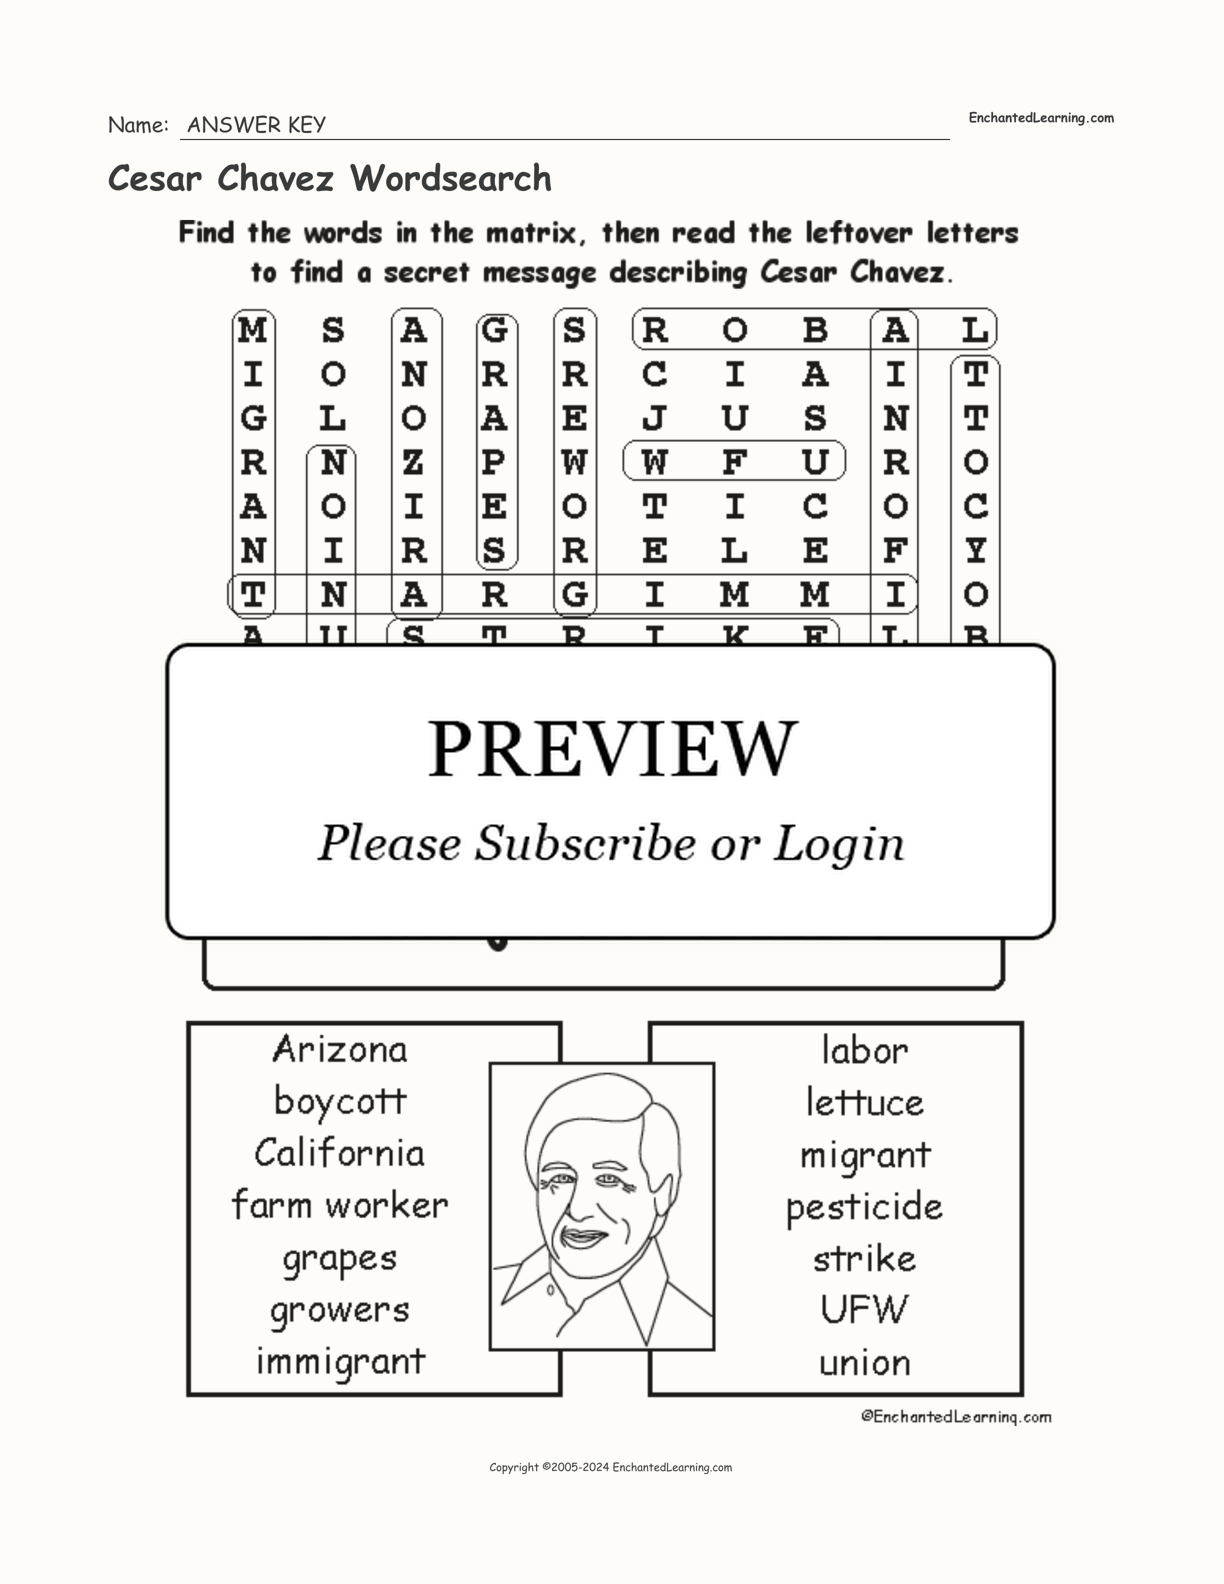 Cesar Chavez Wordsearch interactive worksheet page 2